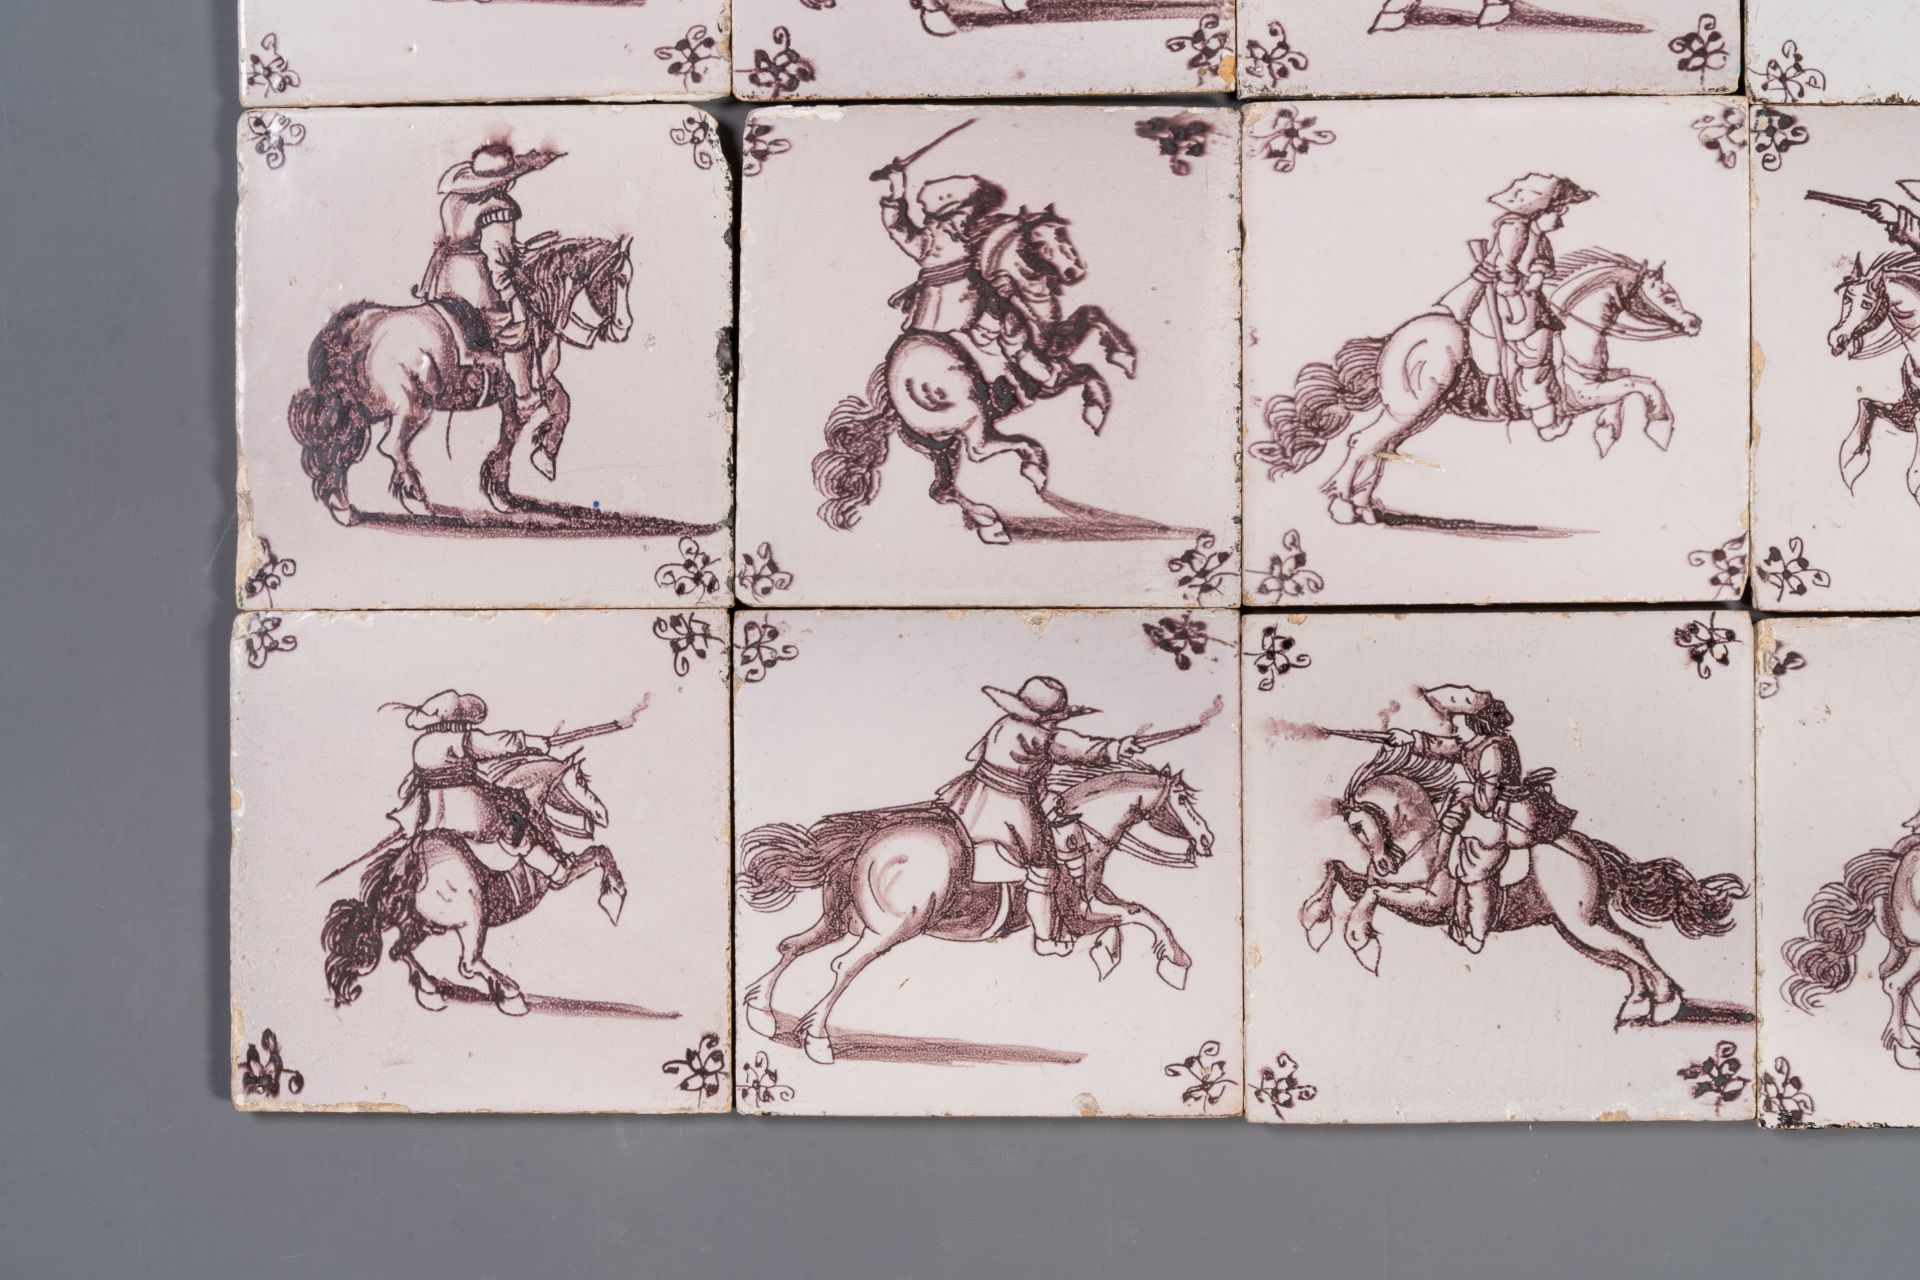 Fifteen Dutch Delft manganese tiles with horse riders, late 17th C. - Bild 13 aus 13